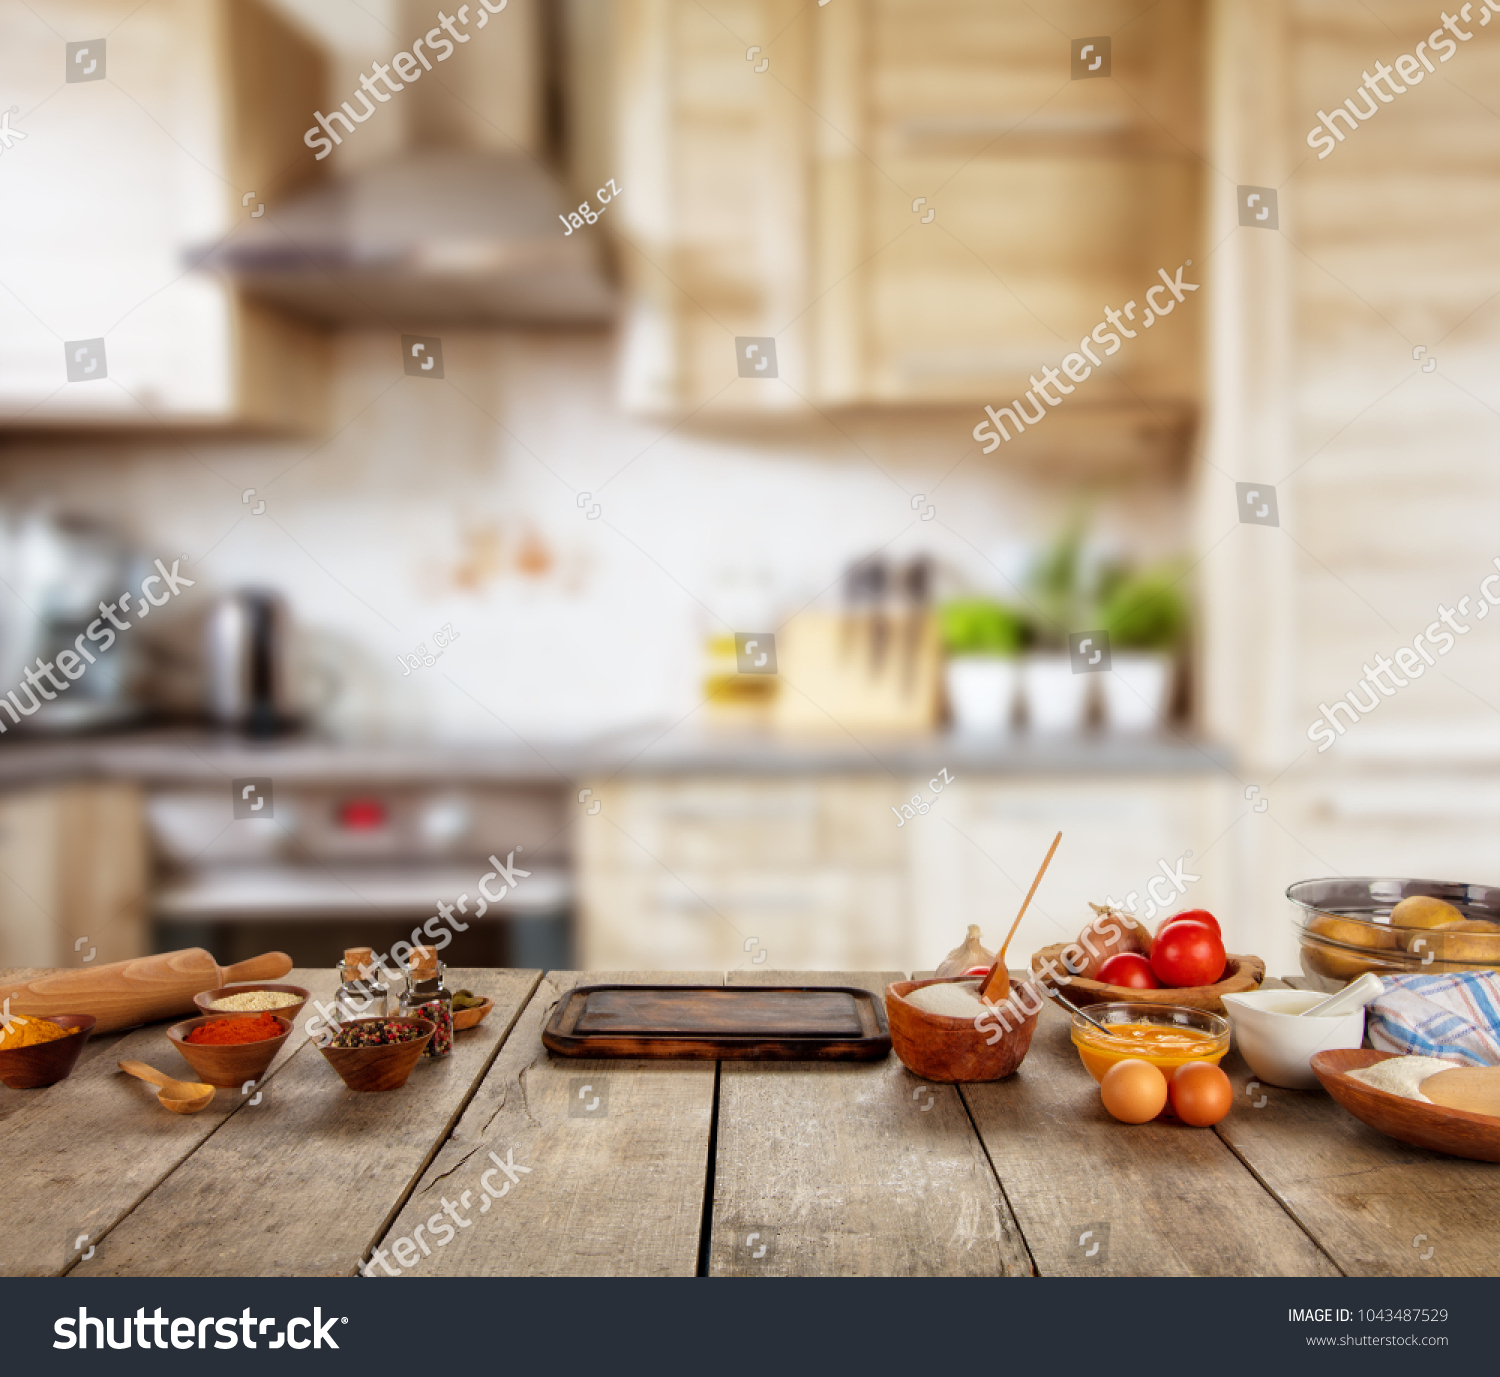 Baking ingredients placed on wooden table, ready for cooking. Copyspace for text. Concept of food preparation, kitchen on background. #1043487529